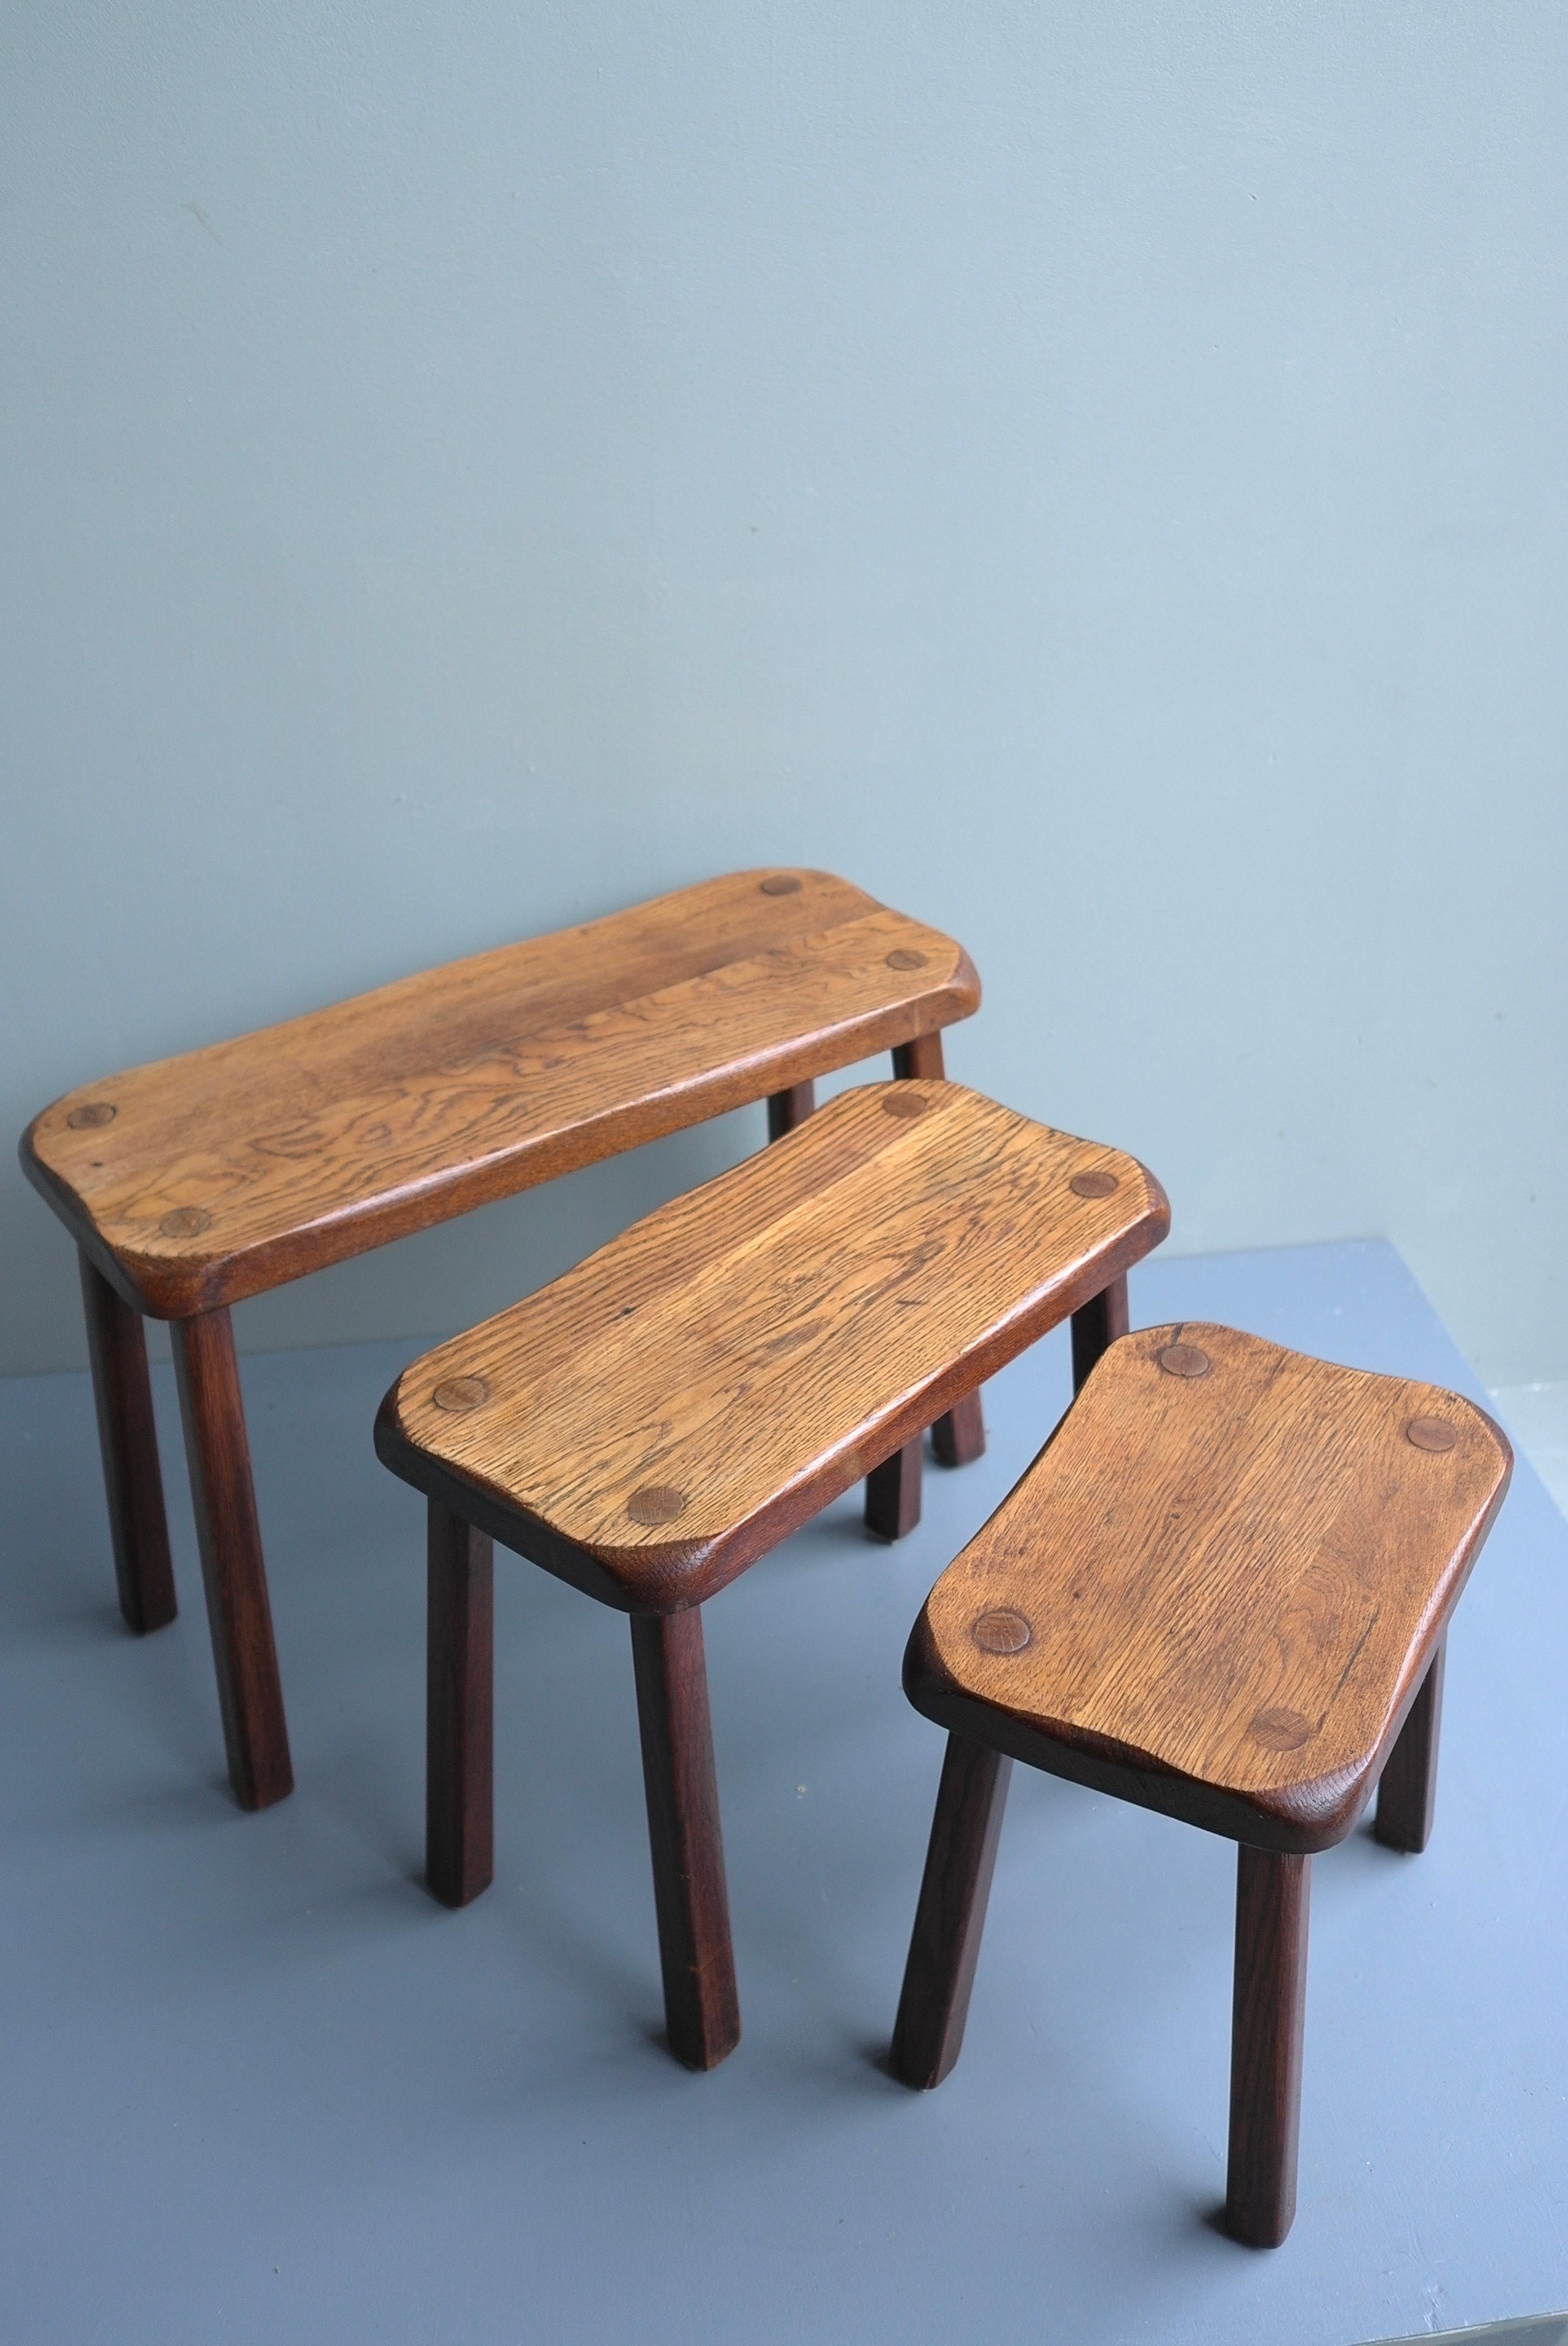 Mid-Century Modern oak nesting tables, France 1960's.
Solid Oak with lovely curved sides.

Sizes:
Largest: 63cmx24cmx45cm
Middle: 49cmx24cmx40cm
Smallest: 35cmx24cmx36cm.